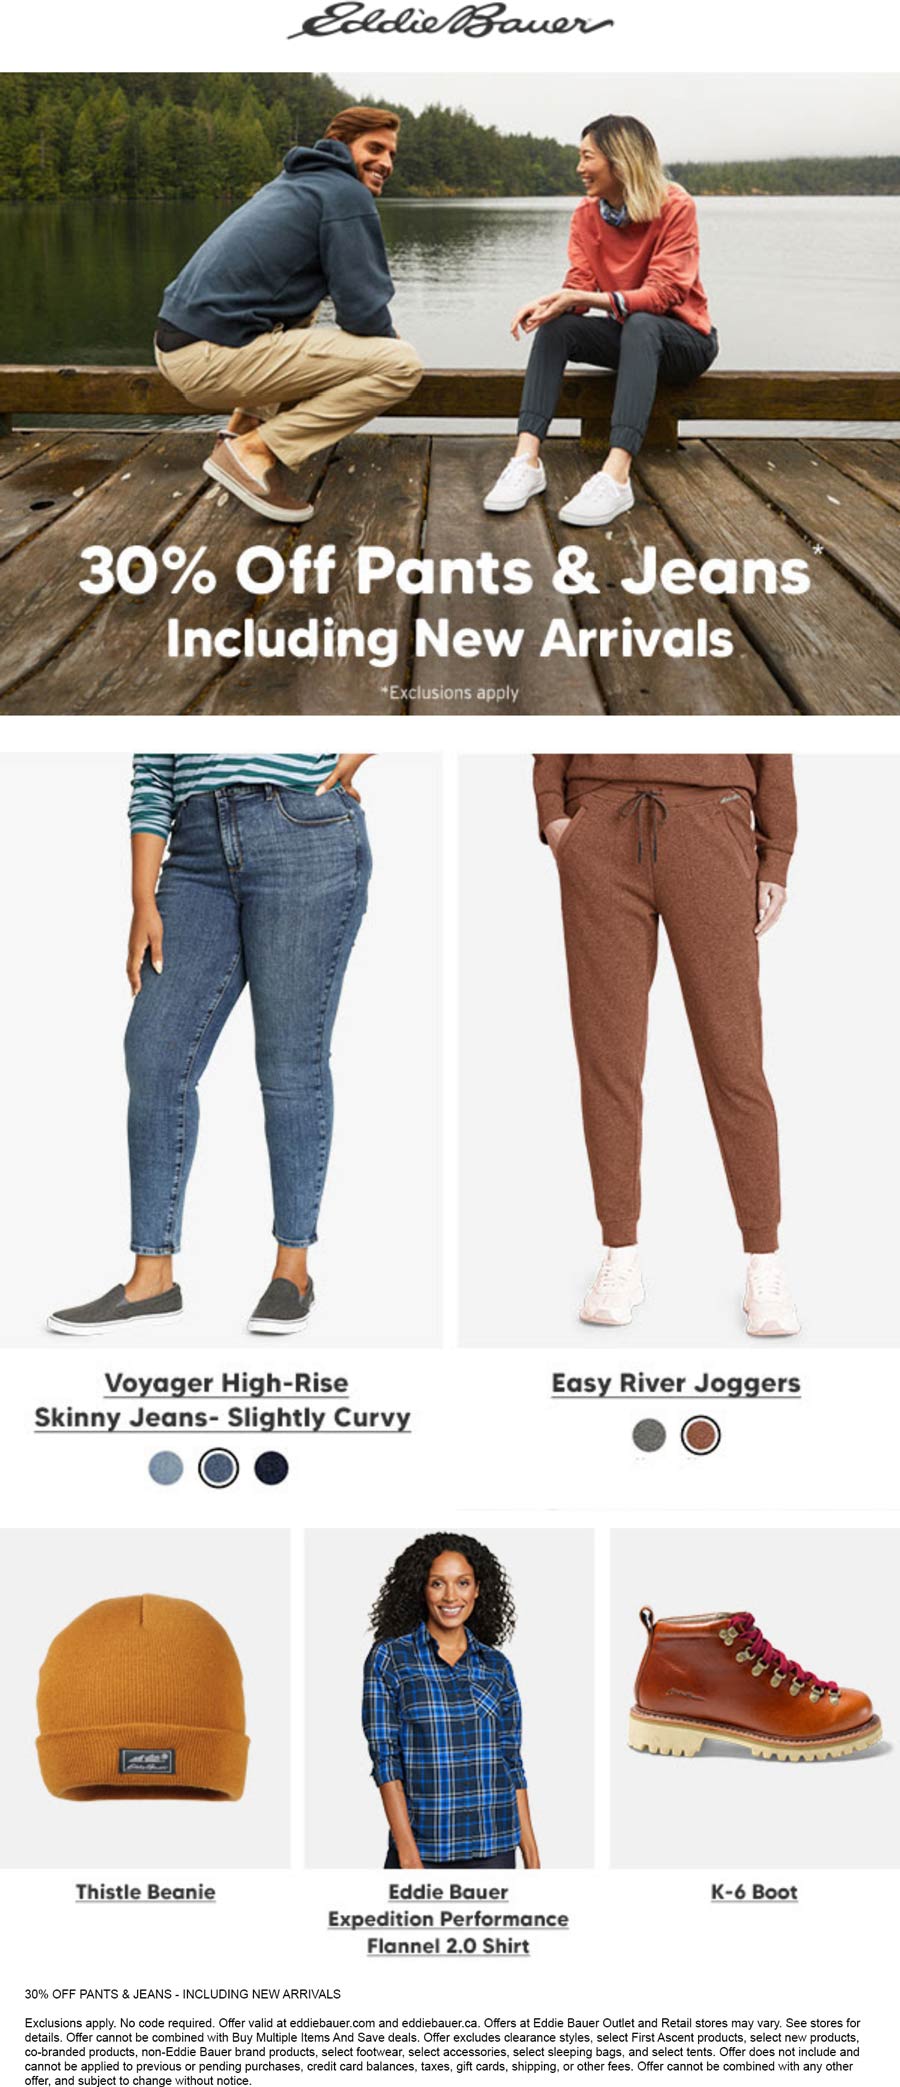 Eddie Bauer stores Coupon  30% off pants & jeans at Eddie Bauer, ditto online + extra 50% off clearance via promo APPLE50 #eddiebauer 